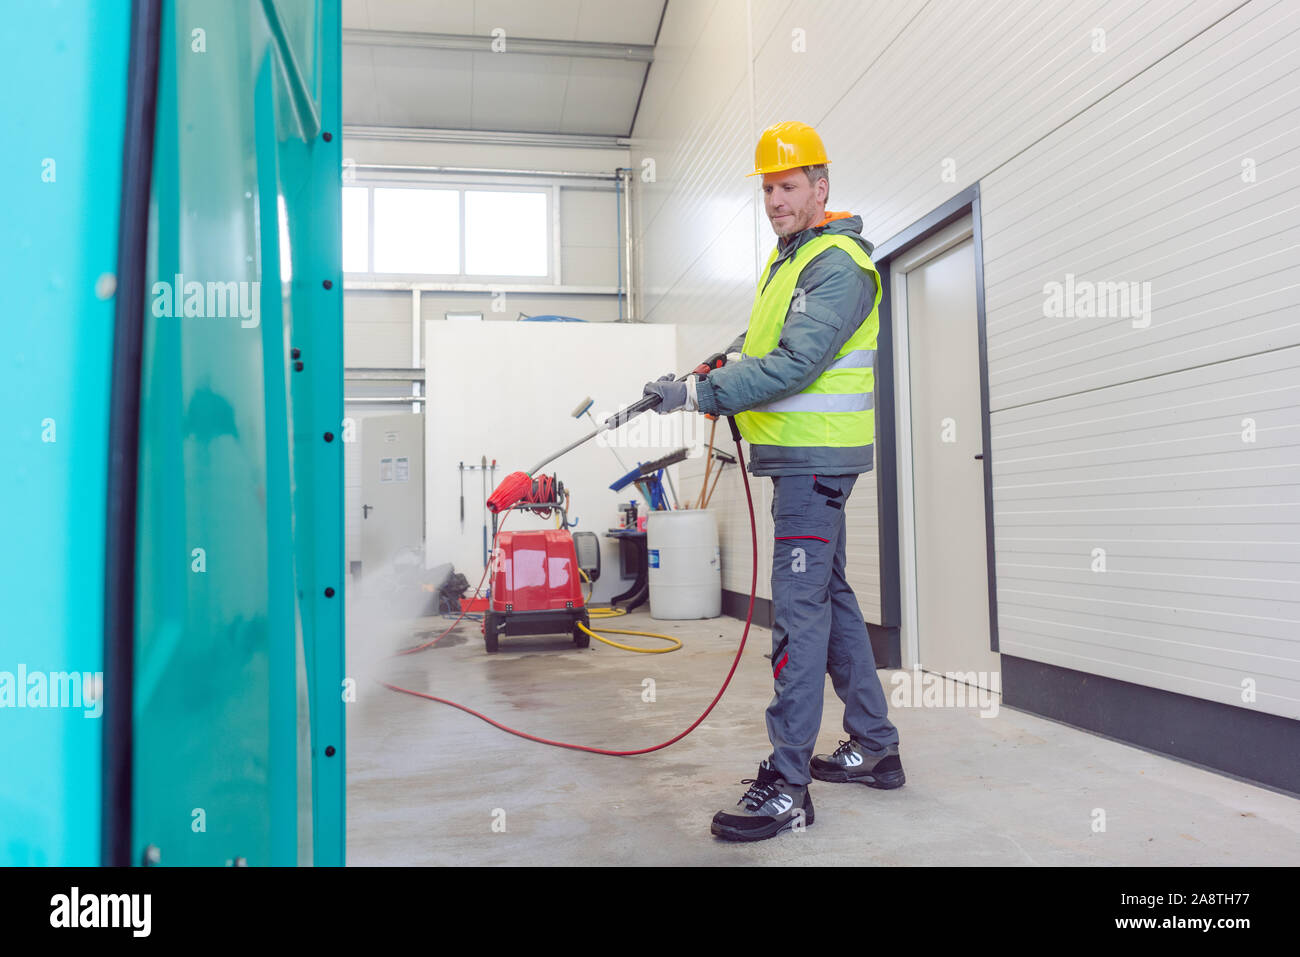 Worker cleaning a rental or mobile toilet Stock Photo